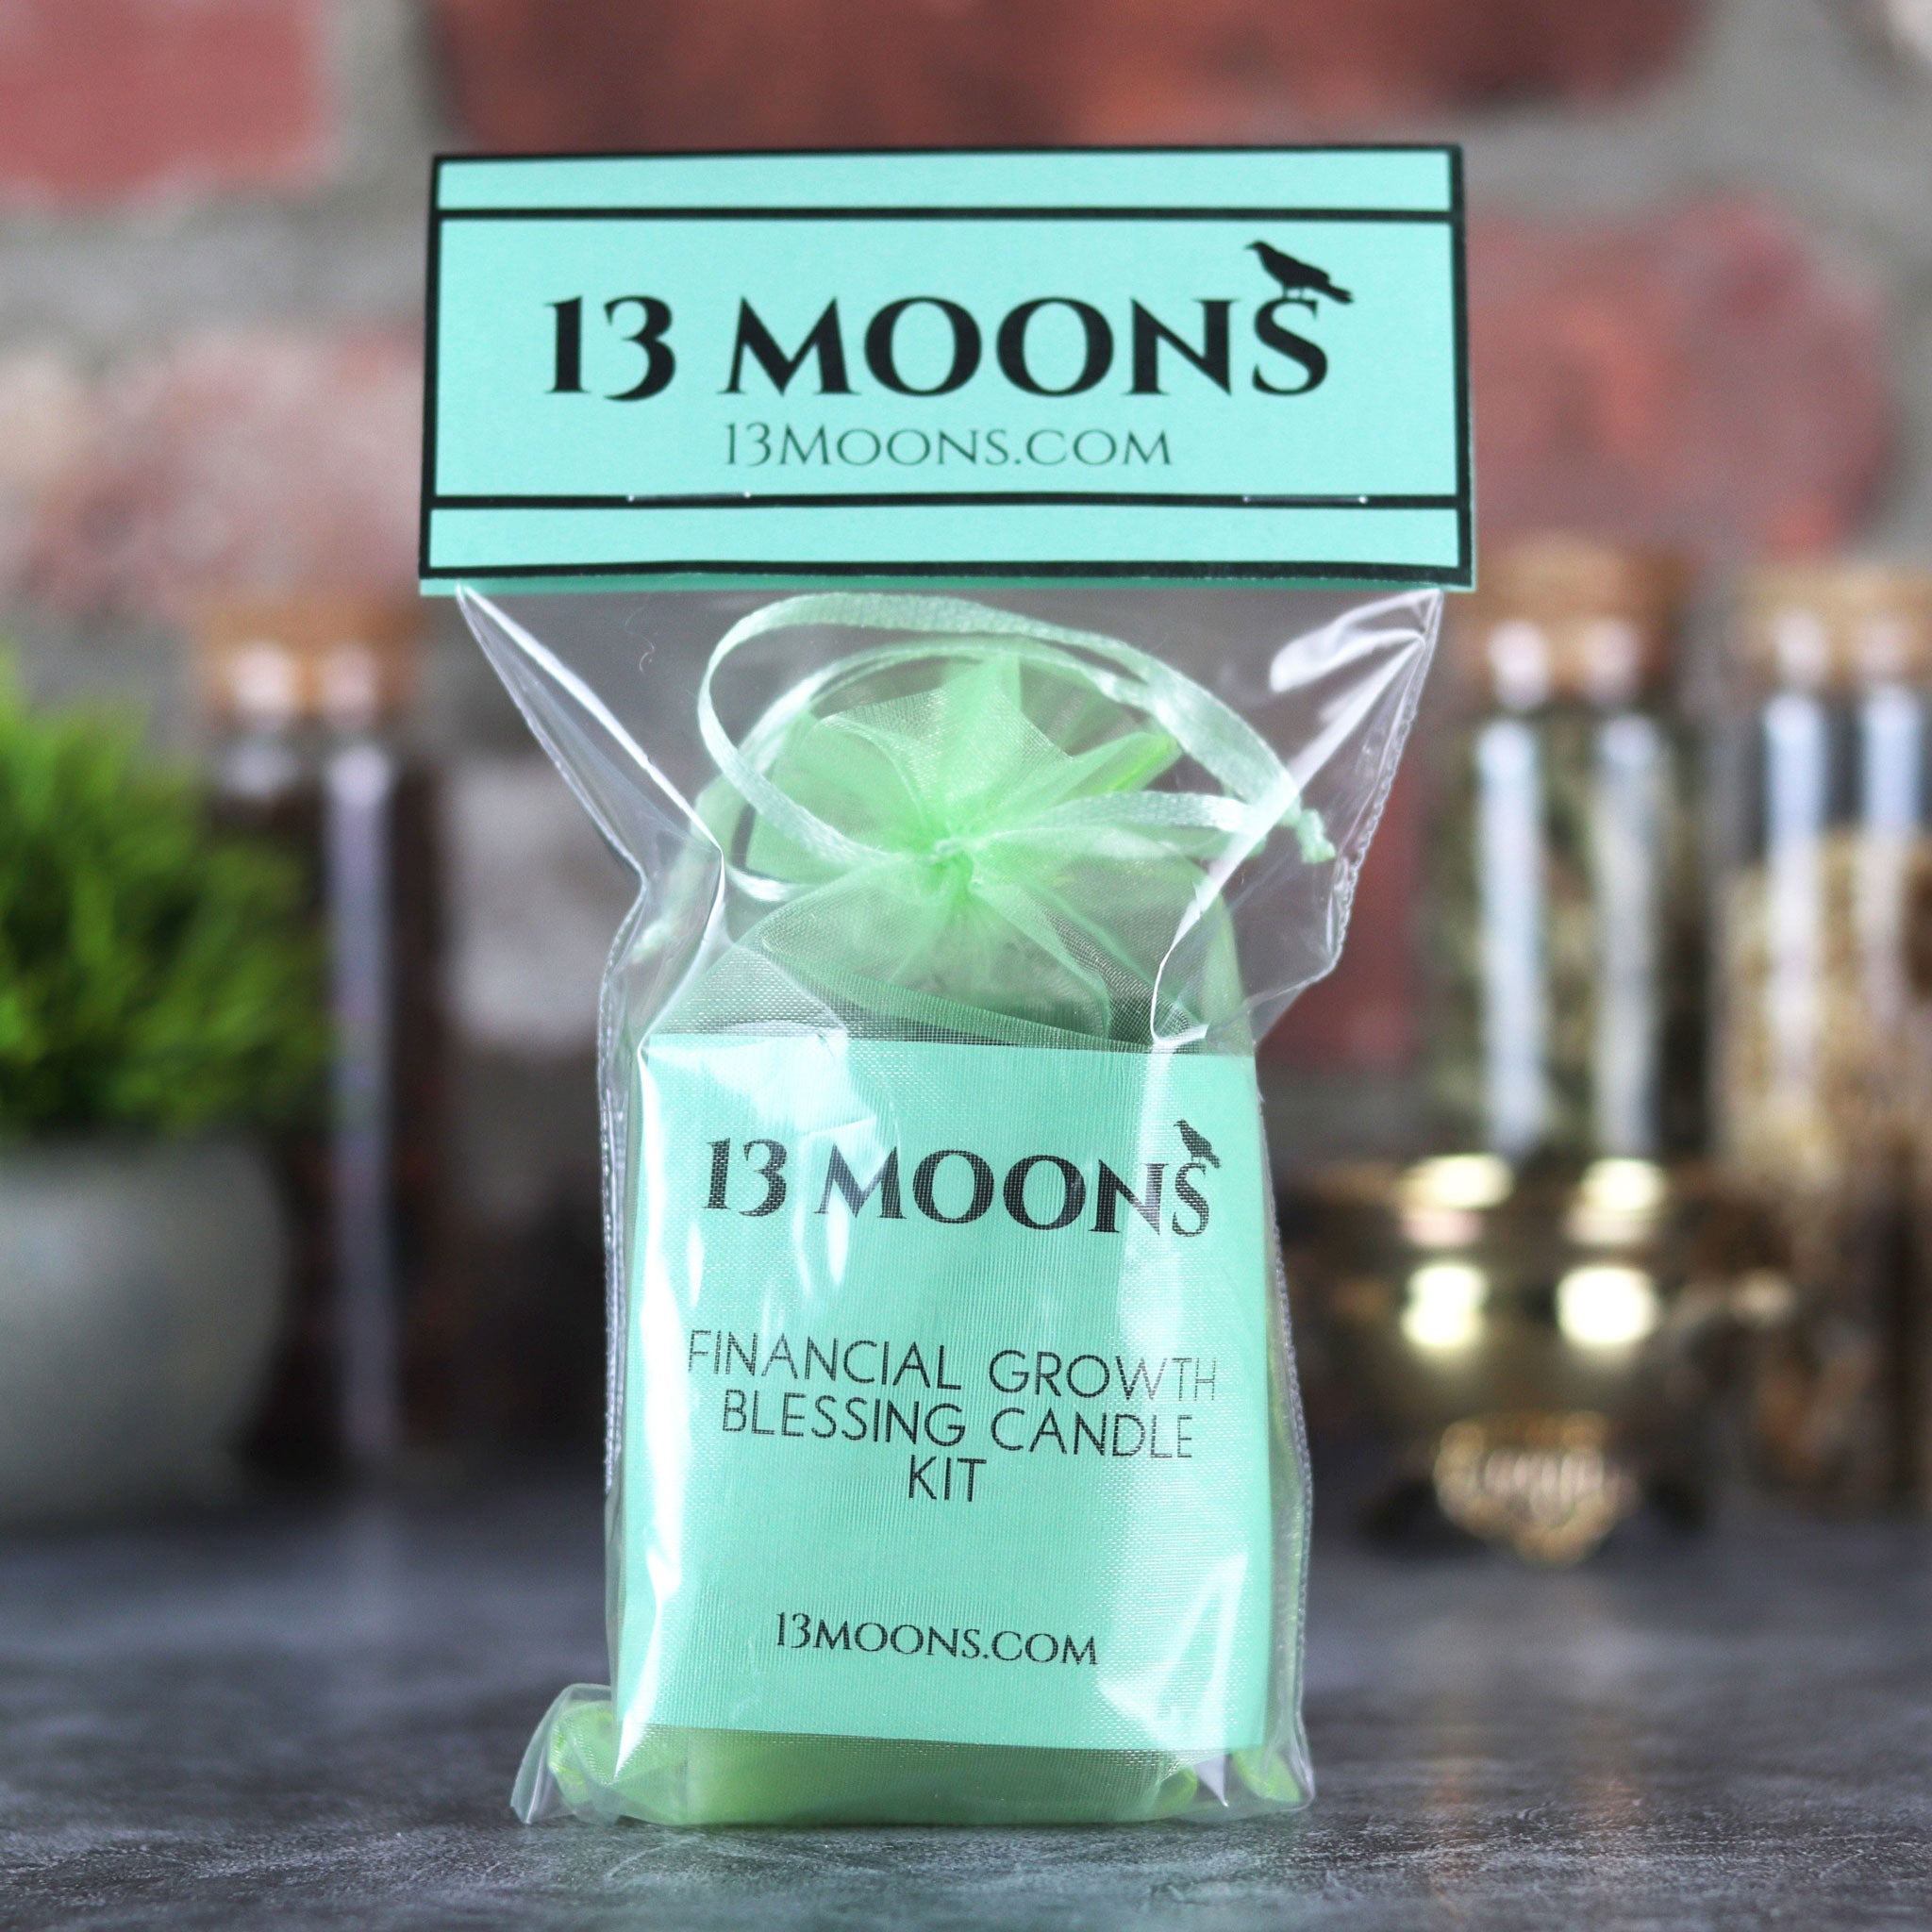 Financial Growth Blessing Candle Kit - 13 Moons